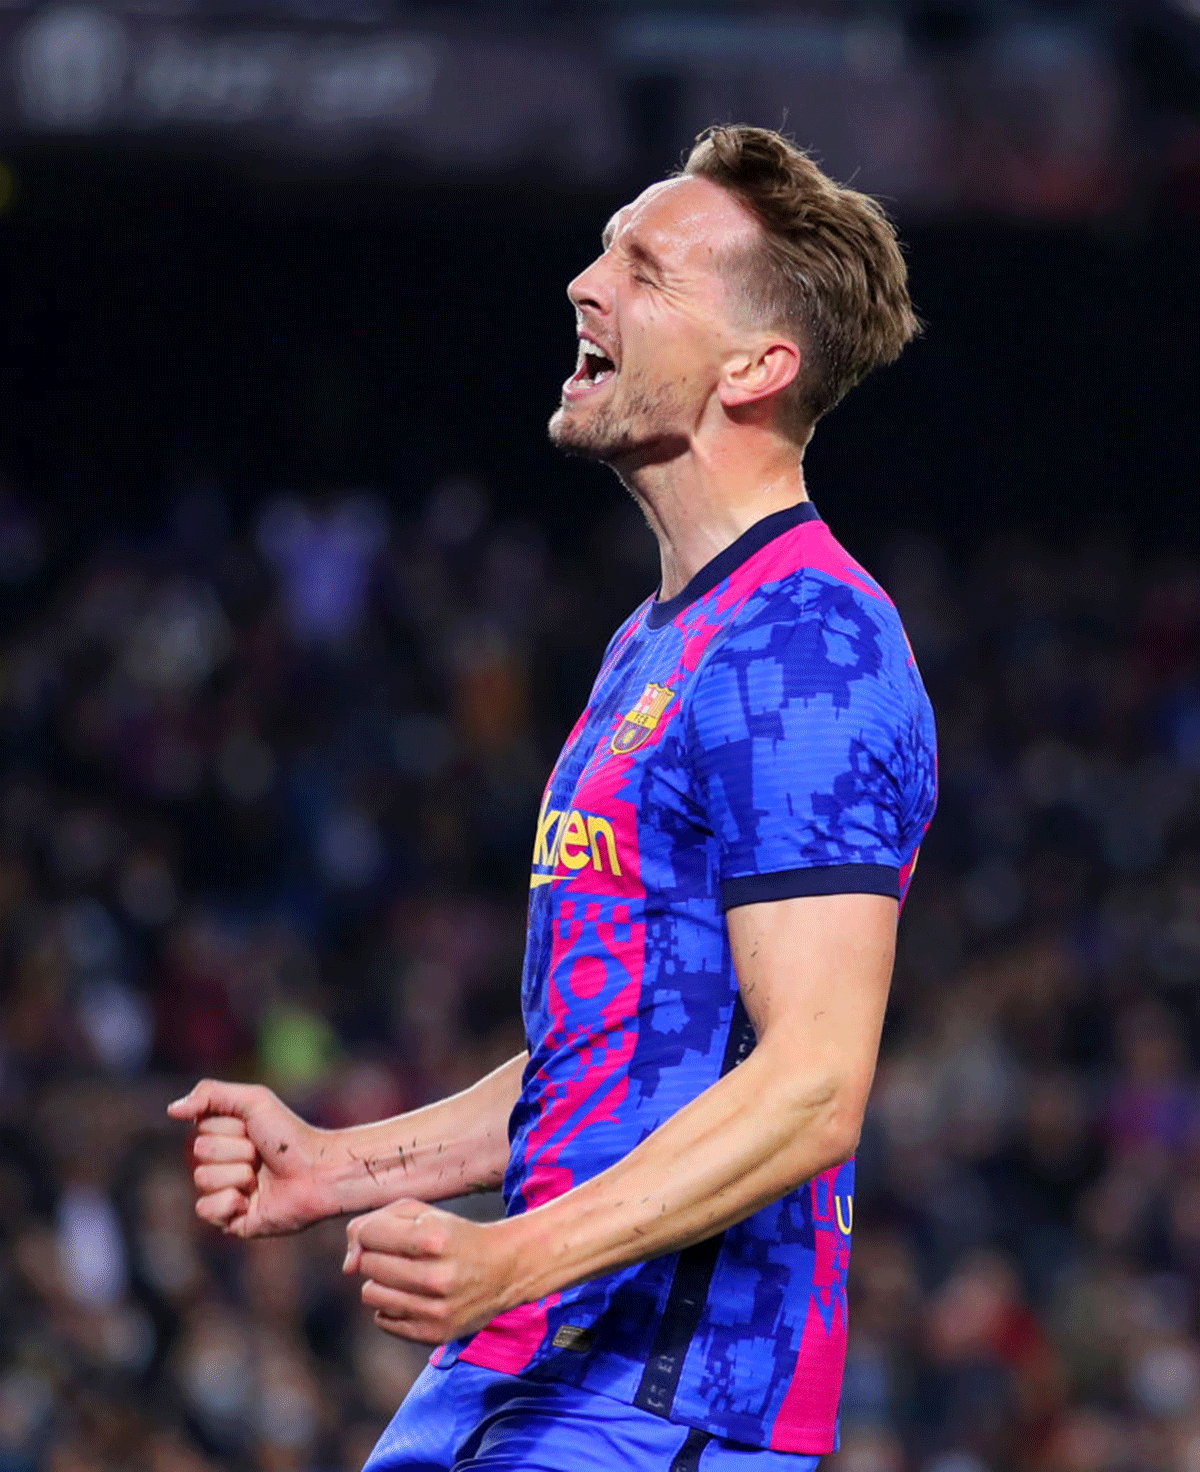 FC Barcelona's Luuk de Jong reacts after a missed chance during the UEFA Europa League Knockout Round Play-Off Leg One match against SSC Napoli at Camp Nou in Barcelona on Thursday